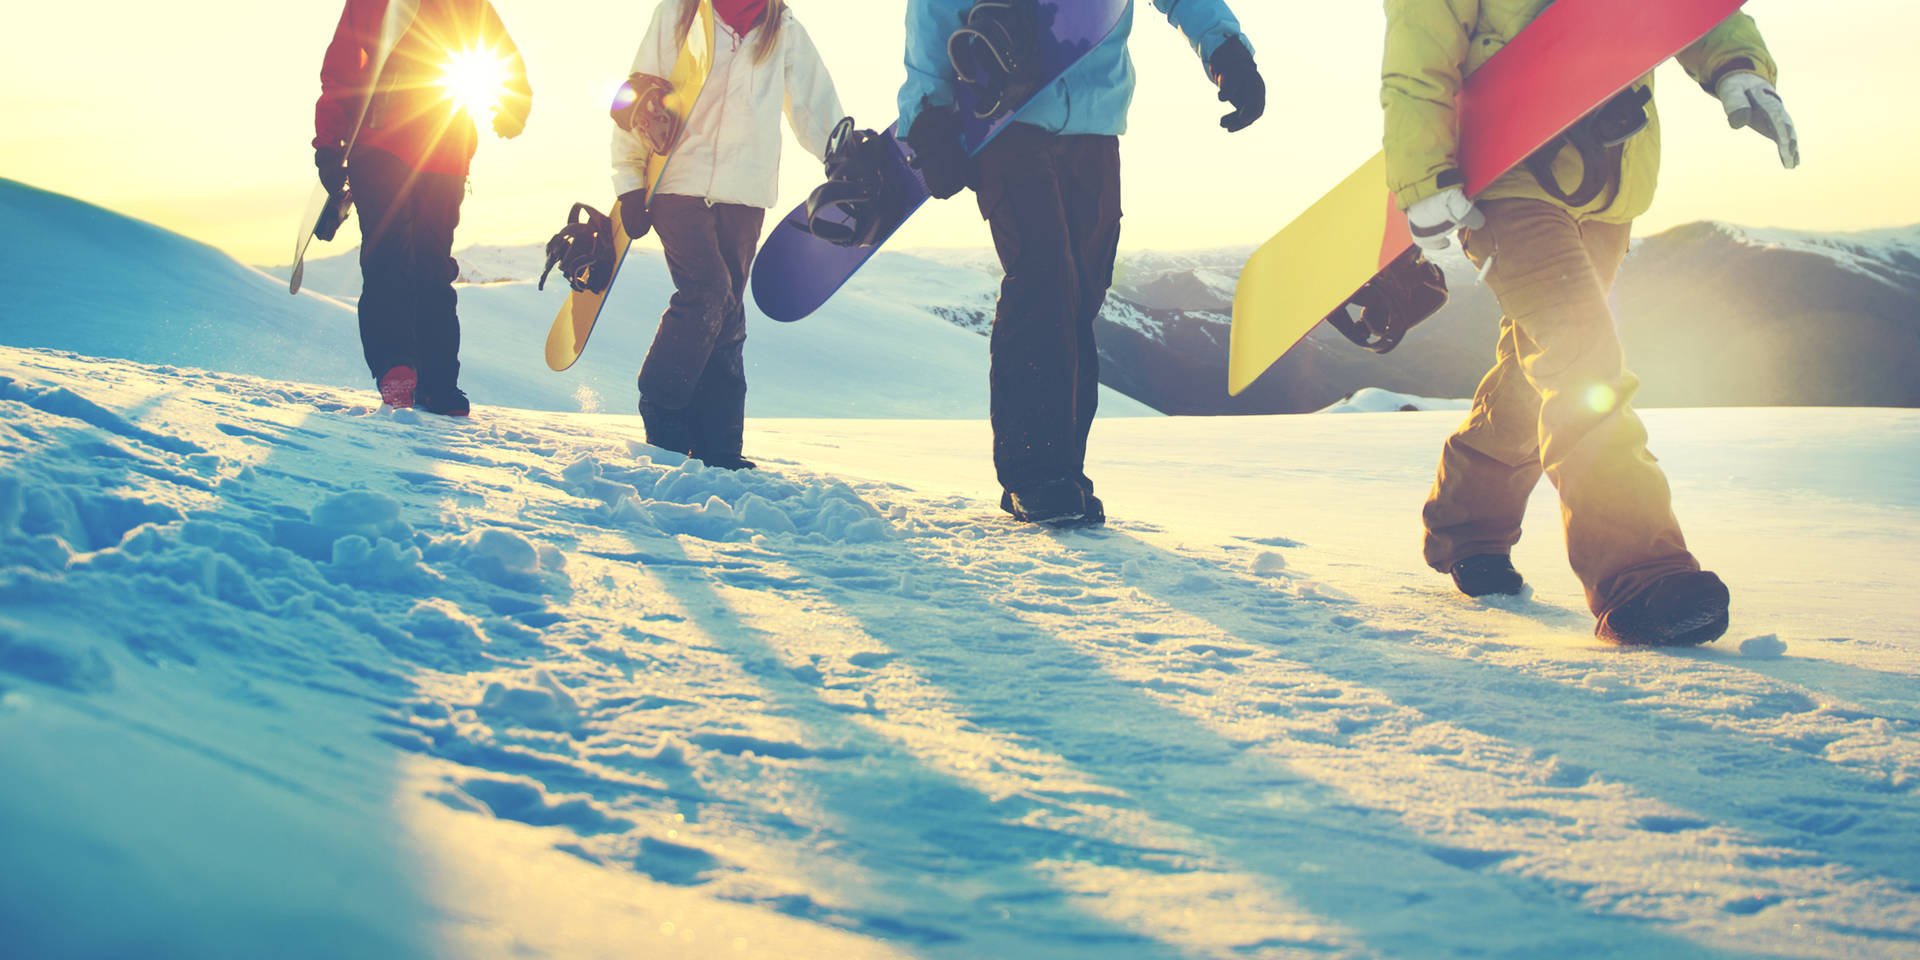 Winter holidays – snowshoe hiking, cross-country skiing and more - H-Hotels.com